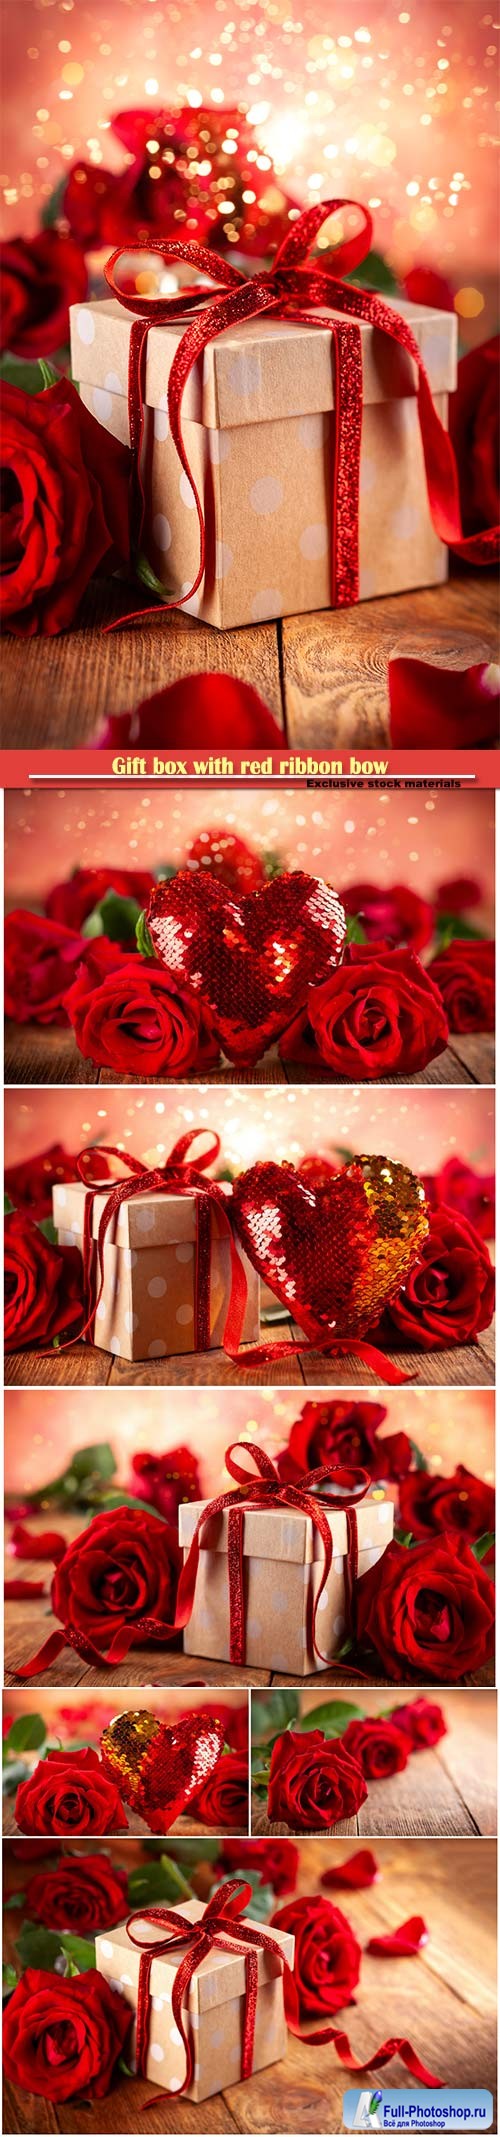 Gift box with red ribbon bow, heart and red roses